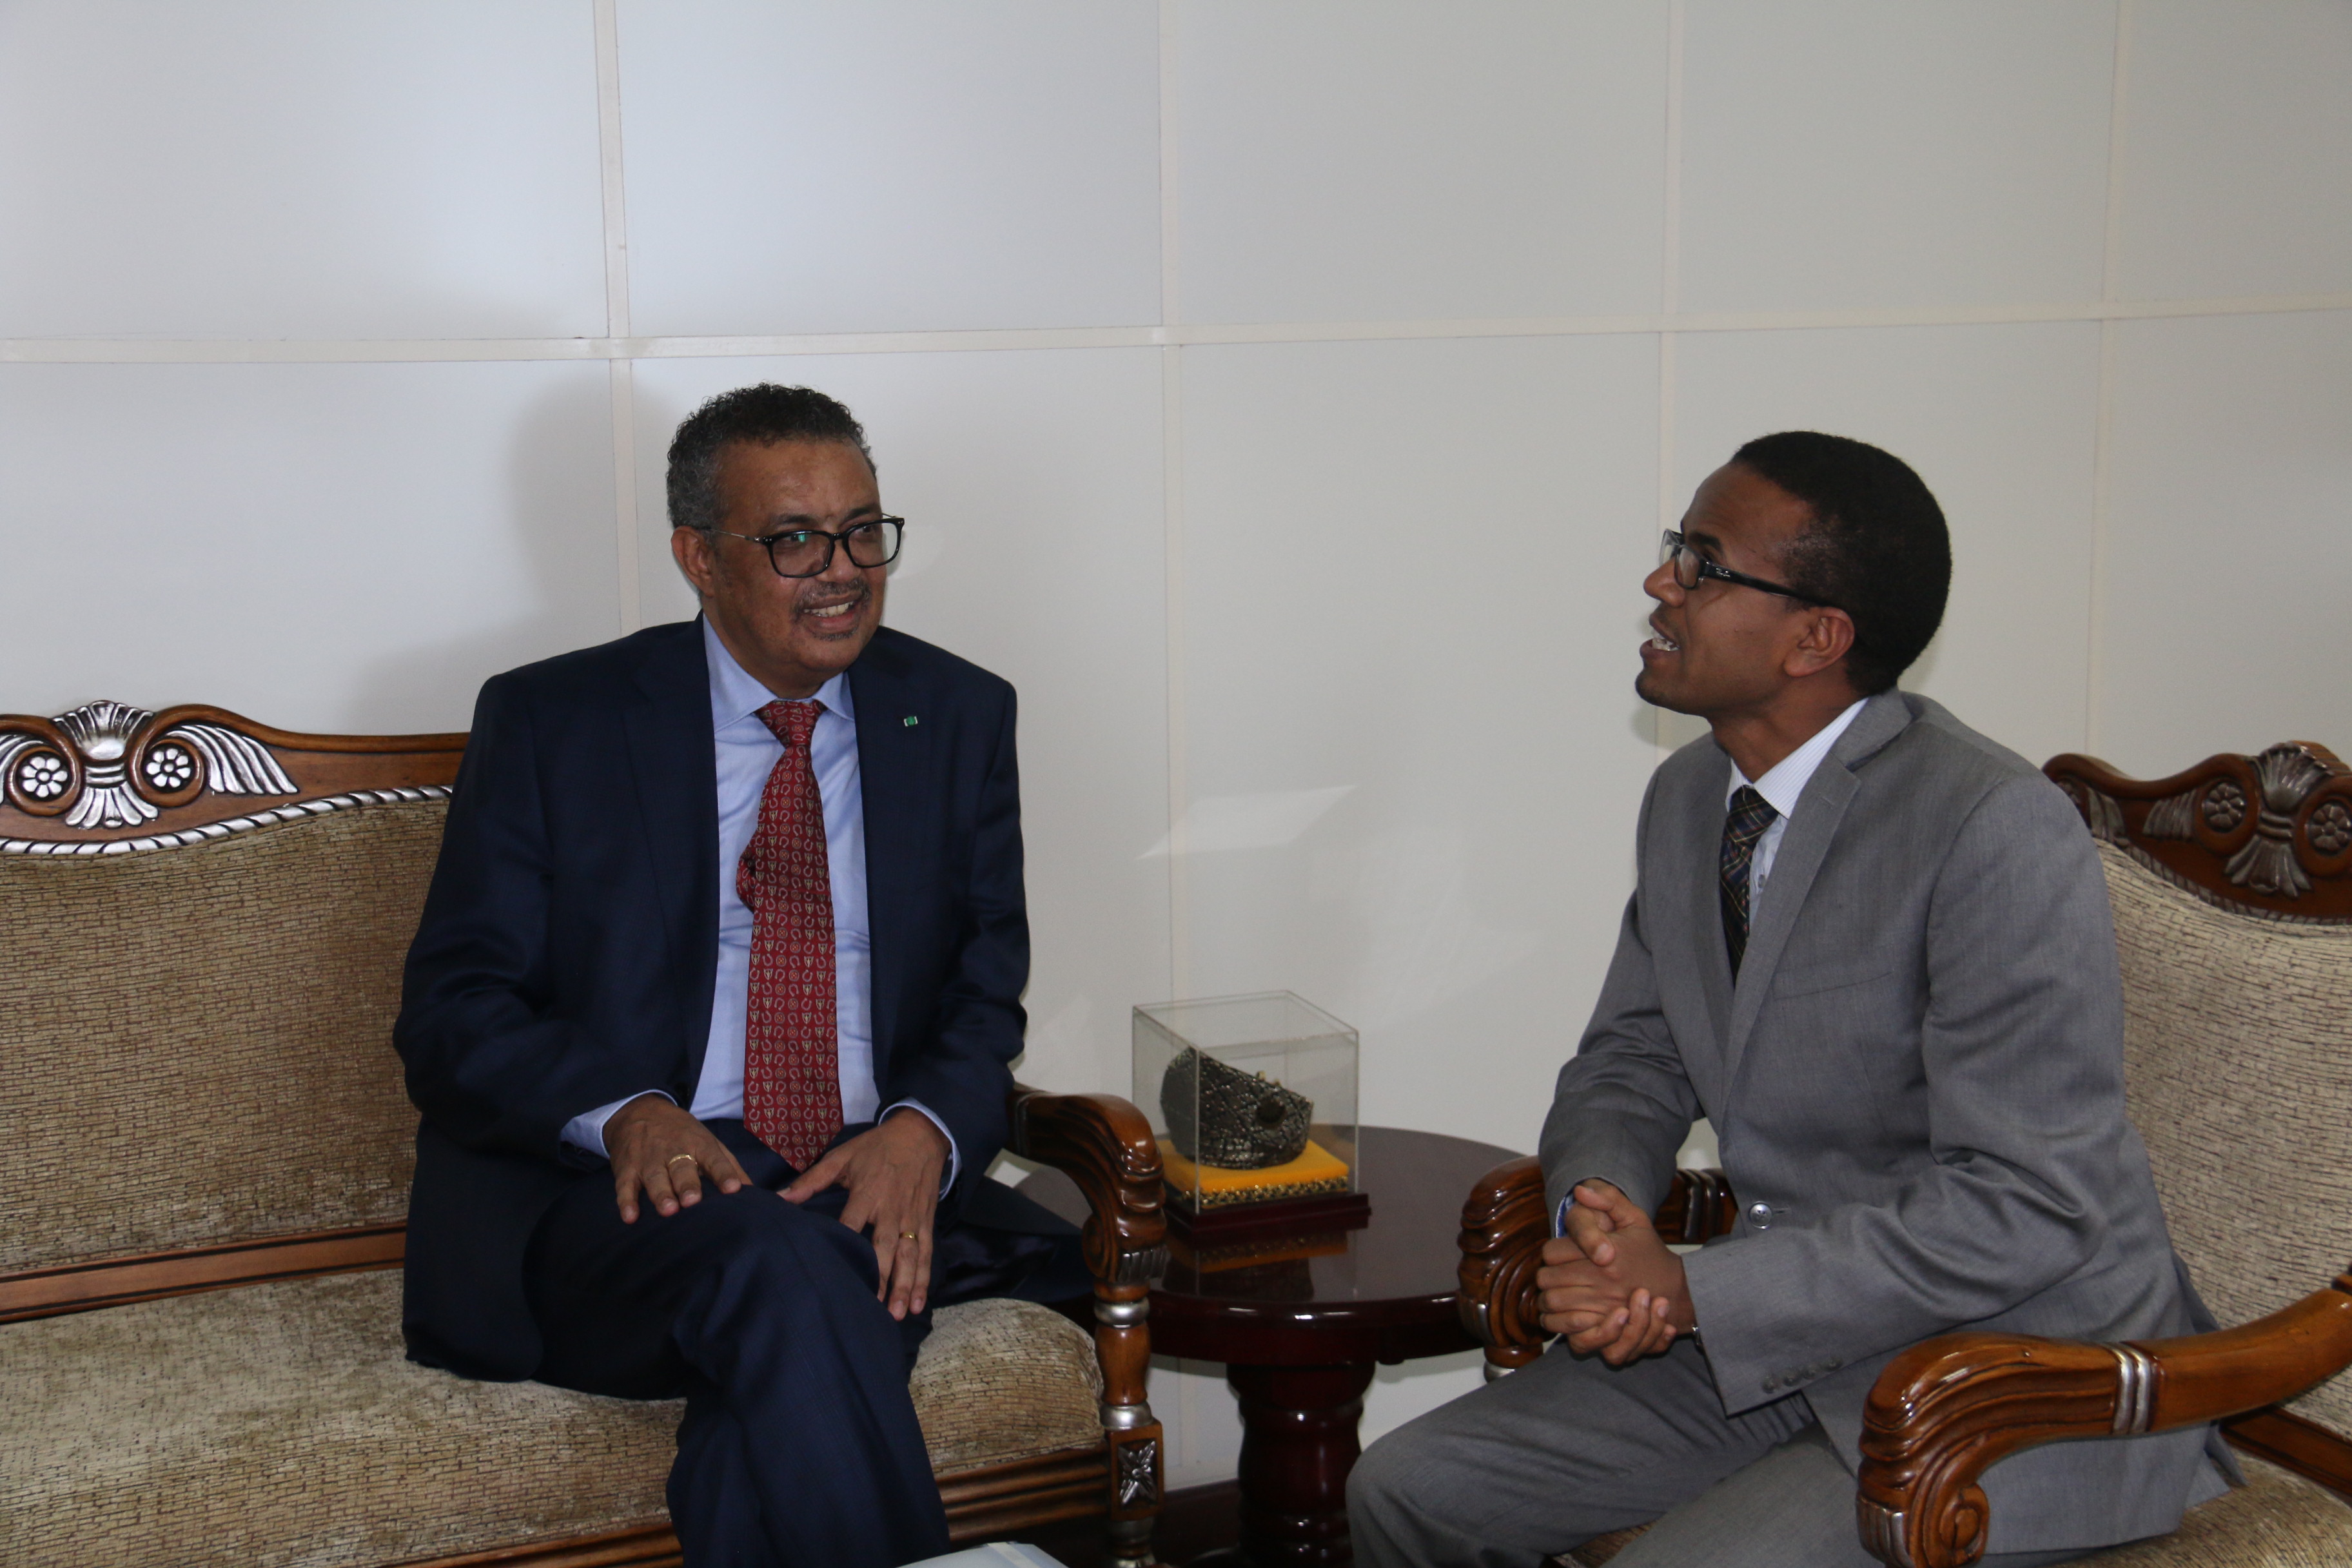 Dr Tedros discussing with H.E Dr Amir Aman, Minister, Ministry of Health